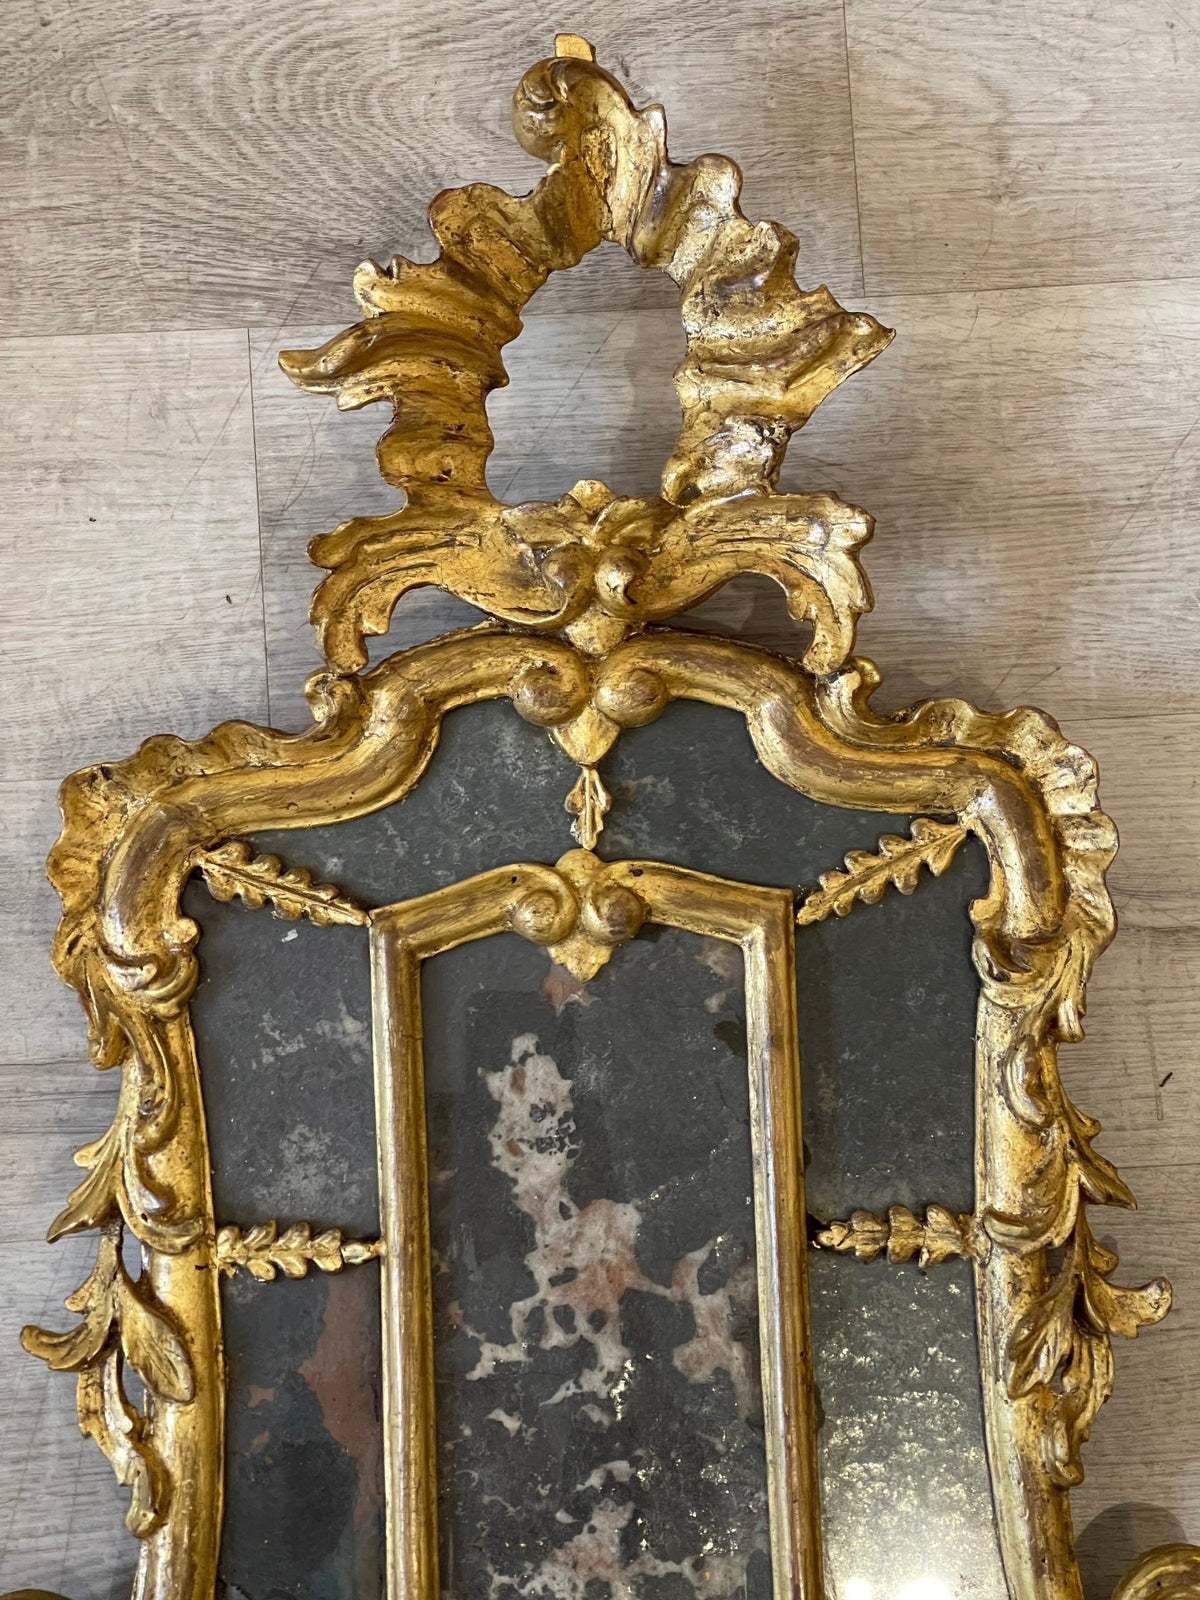 Rare Pair of Carved and Gilded Venetian Mirrors, 18th Century - Helen Storey Antiques